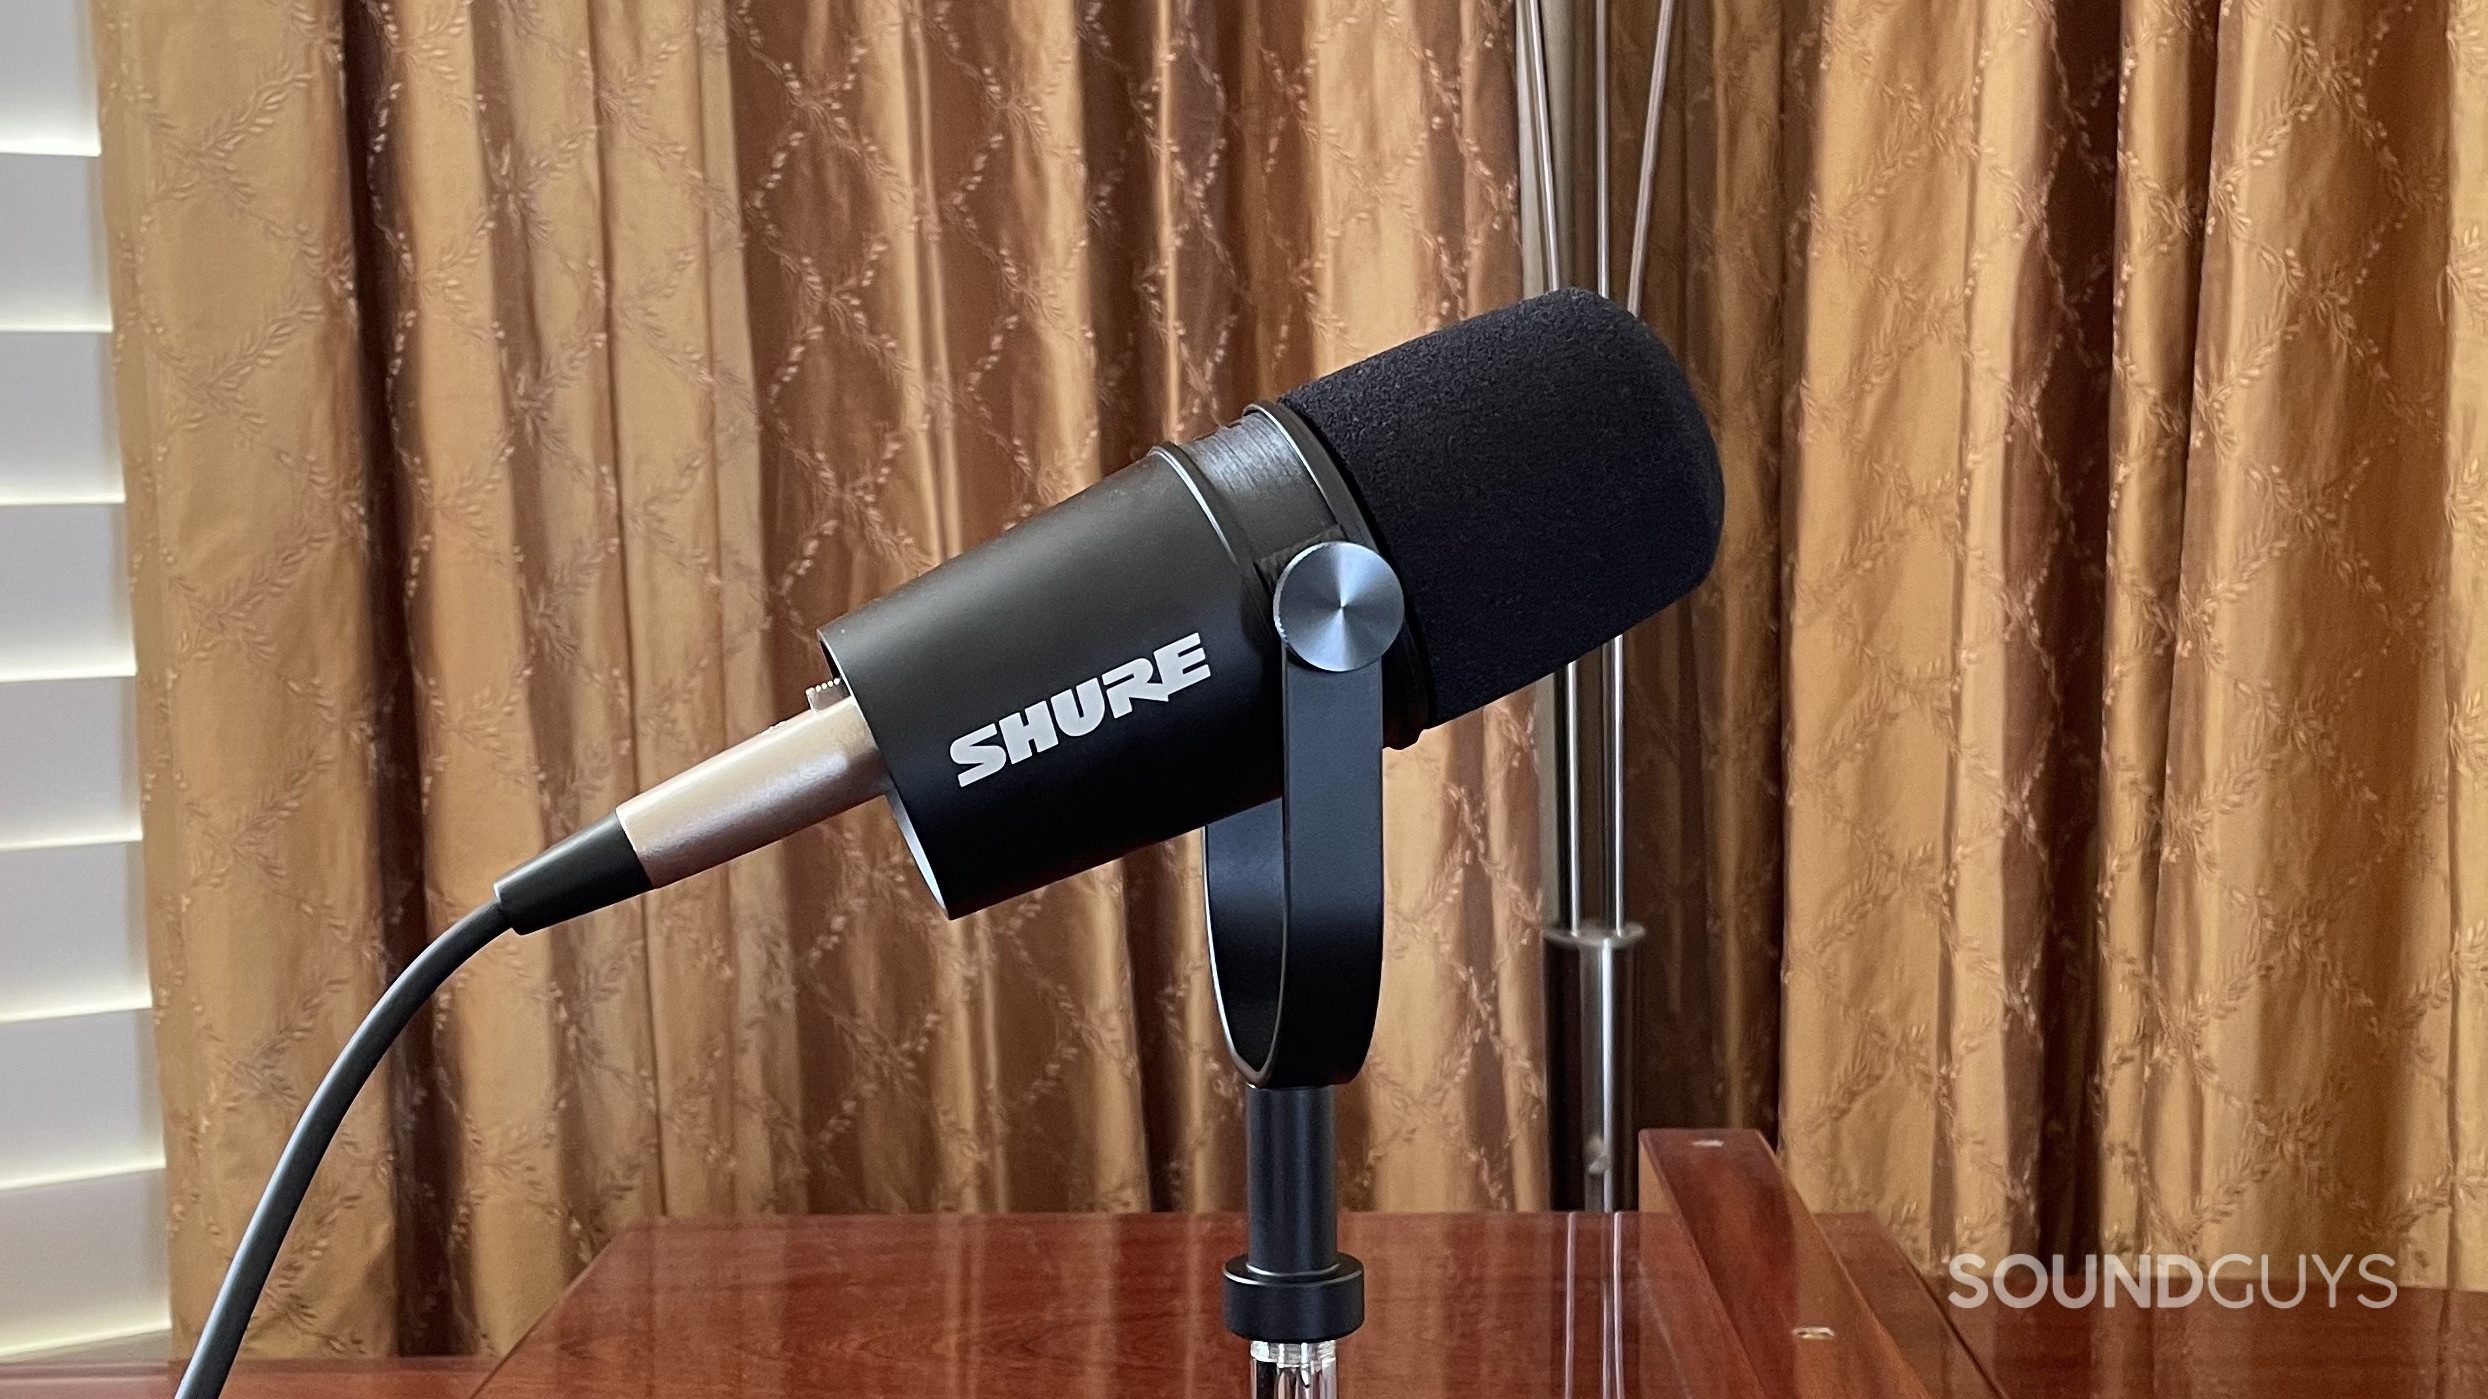 The Shure MV7X with curtains in the background.